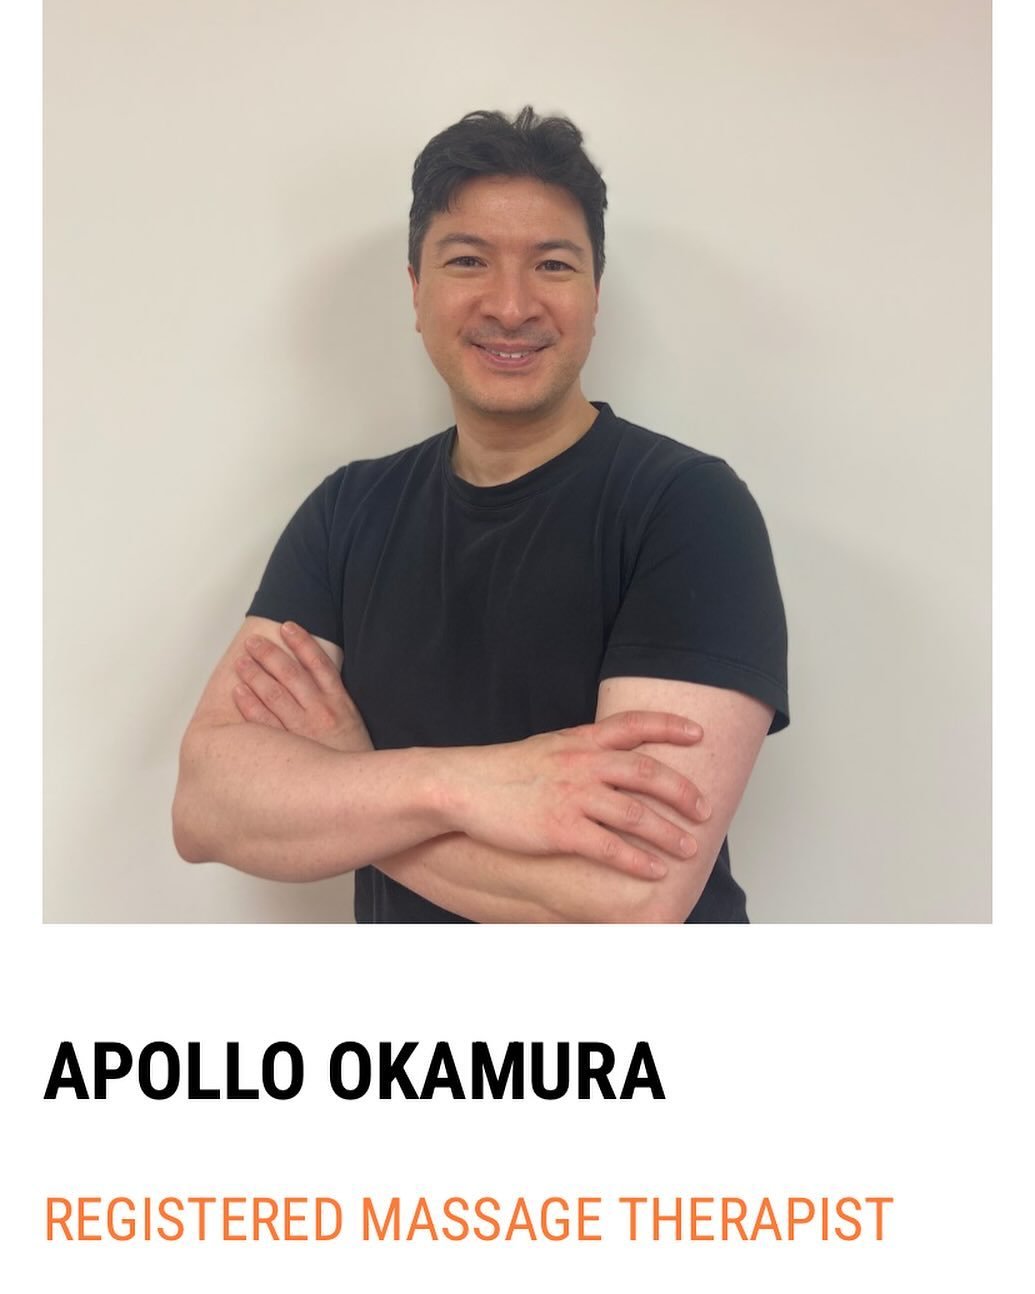 Join us in welcoming RMT Apollo Okamura to the b-Stretched team! 

Graduated in 2020, Apollo Okamura has had the pleasure of working in clinical rehabilitation, luxury spas, and educating future massage therapists as a college instructor. Combining t